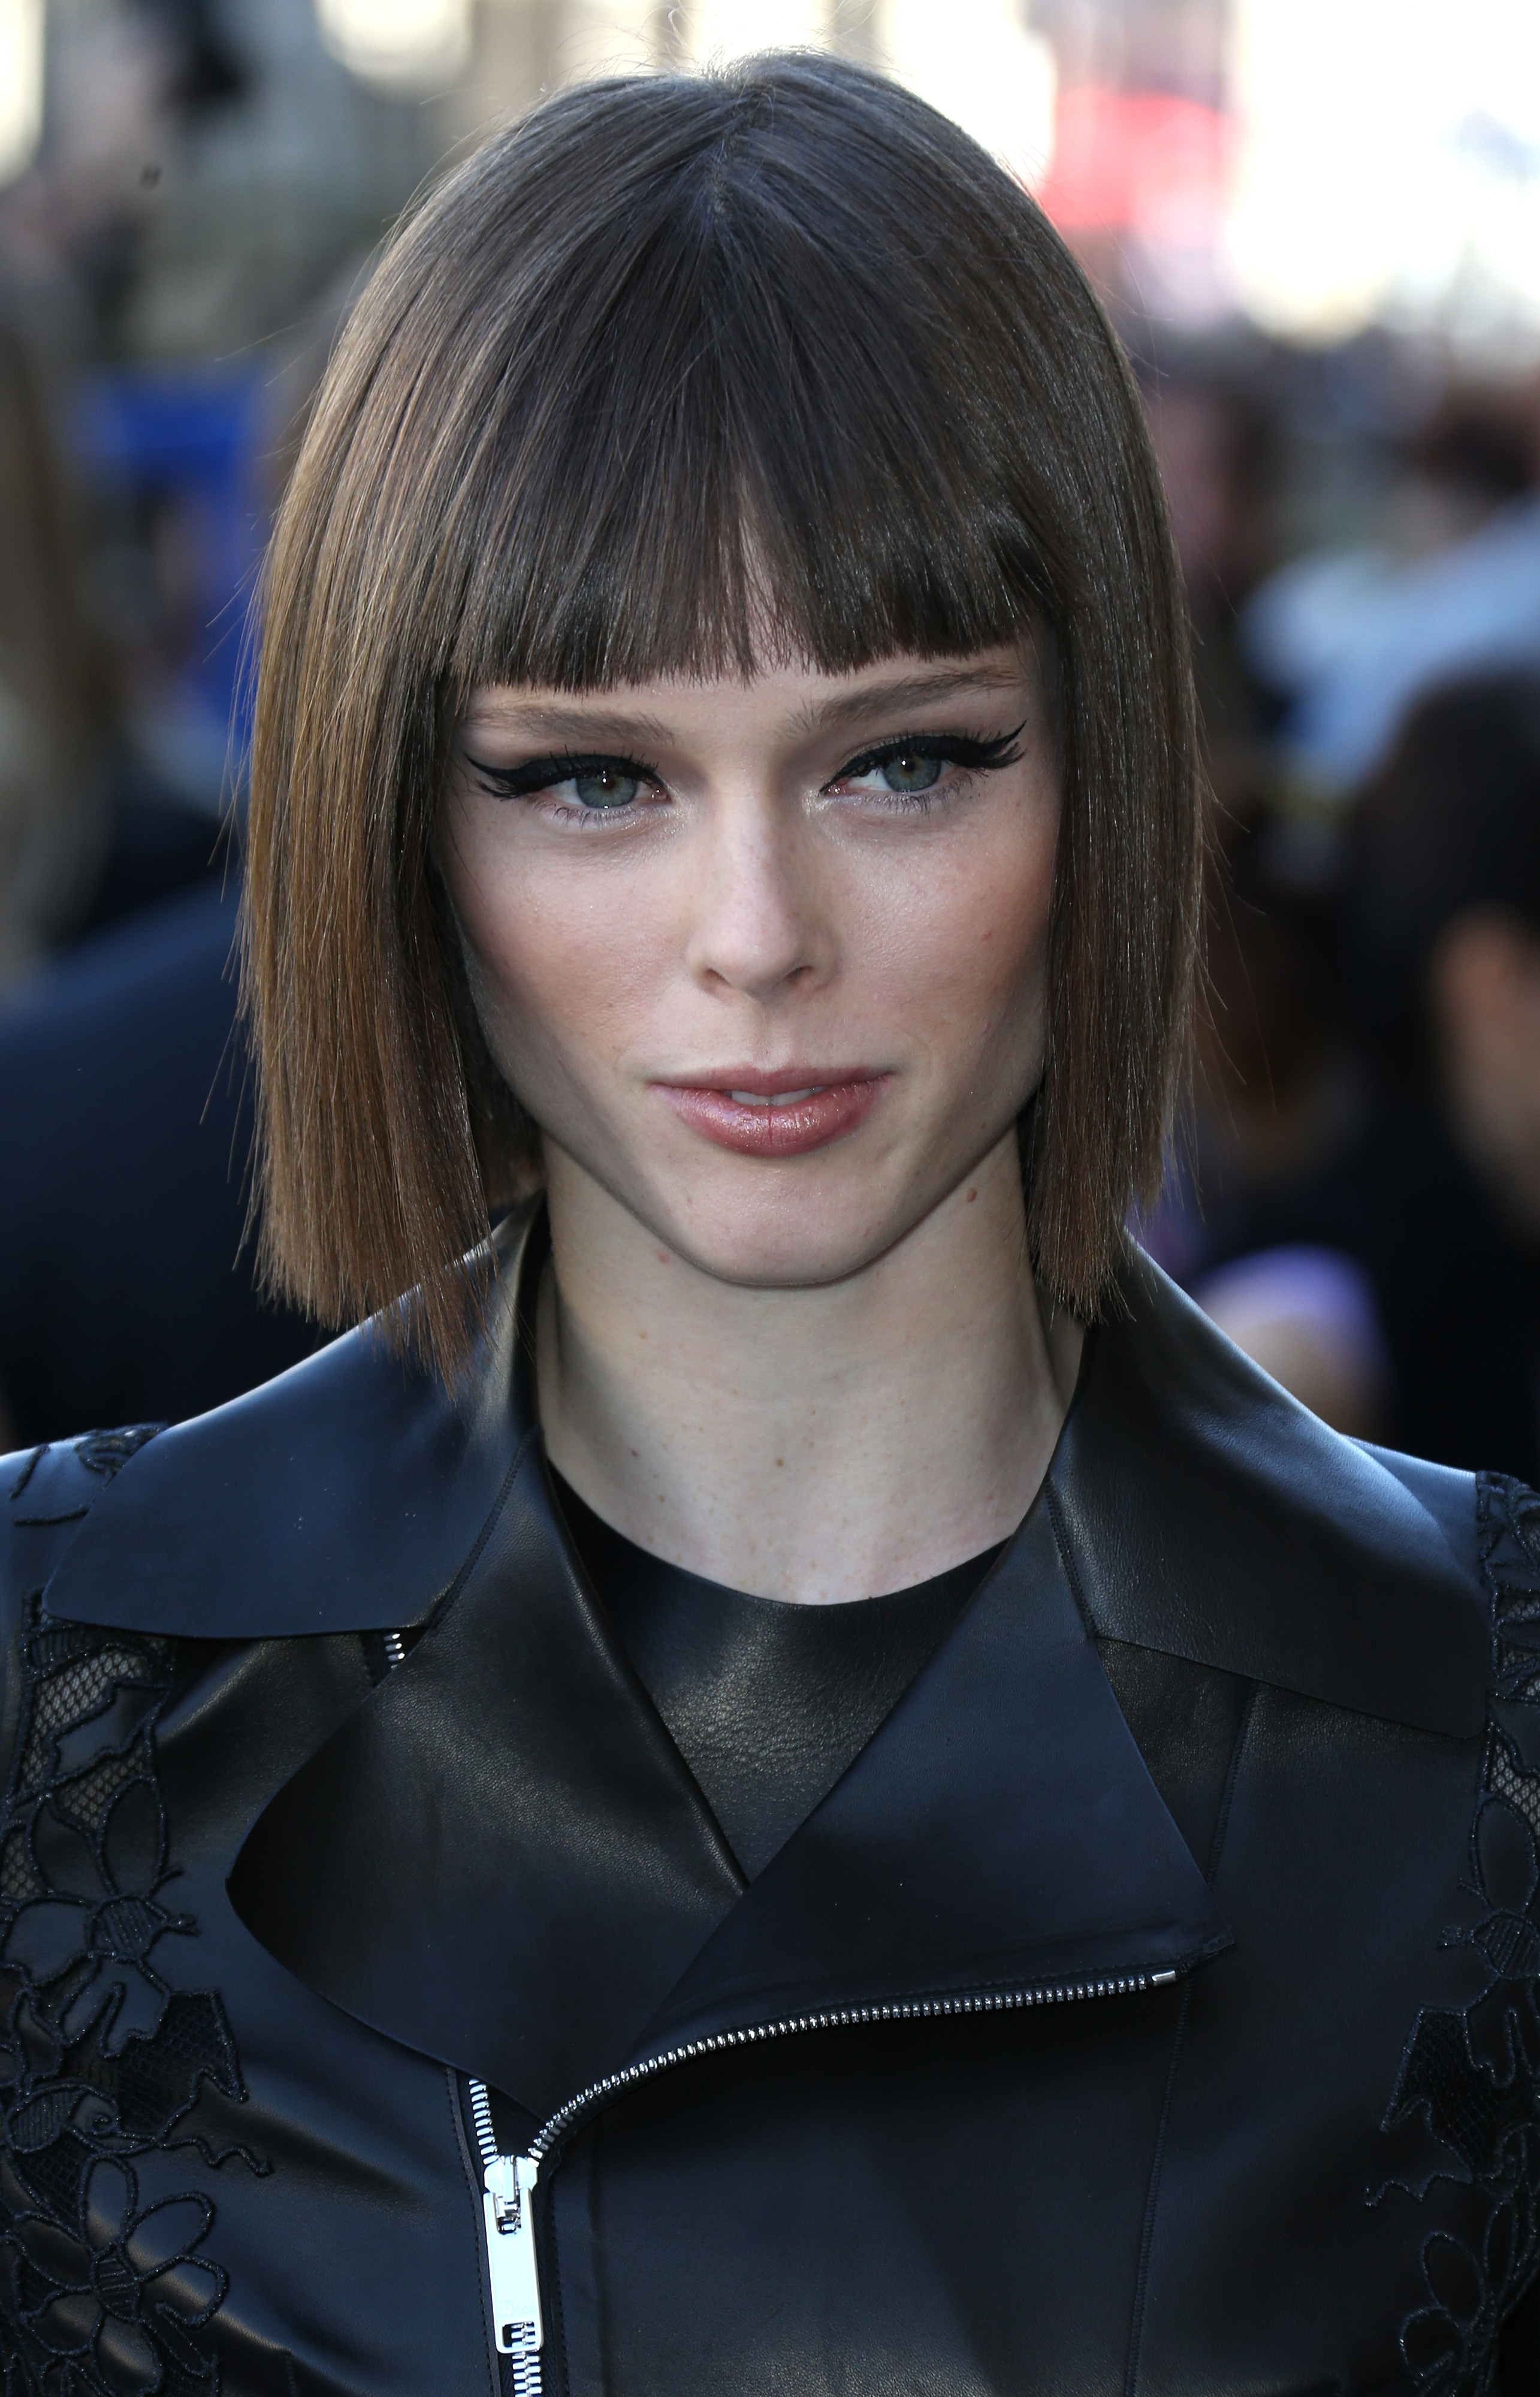 PARIS, FRANCE - SEPTEMBER 26: Coco Rocha attends Christian Dior fashion show at Carre du Louvre as part of the Paris Fashion Week Womenswear Spring/Summer 2015 on September 26, 2014 in Paris, France. (Photo by Jean Catuffe/GC Images)